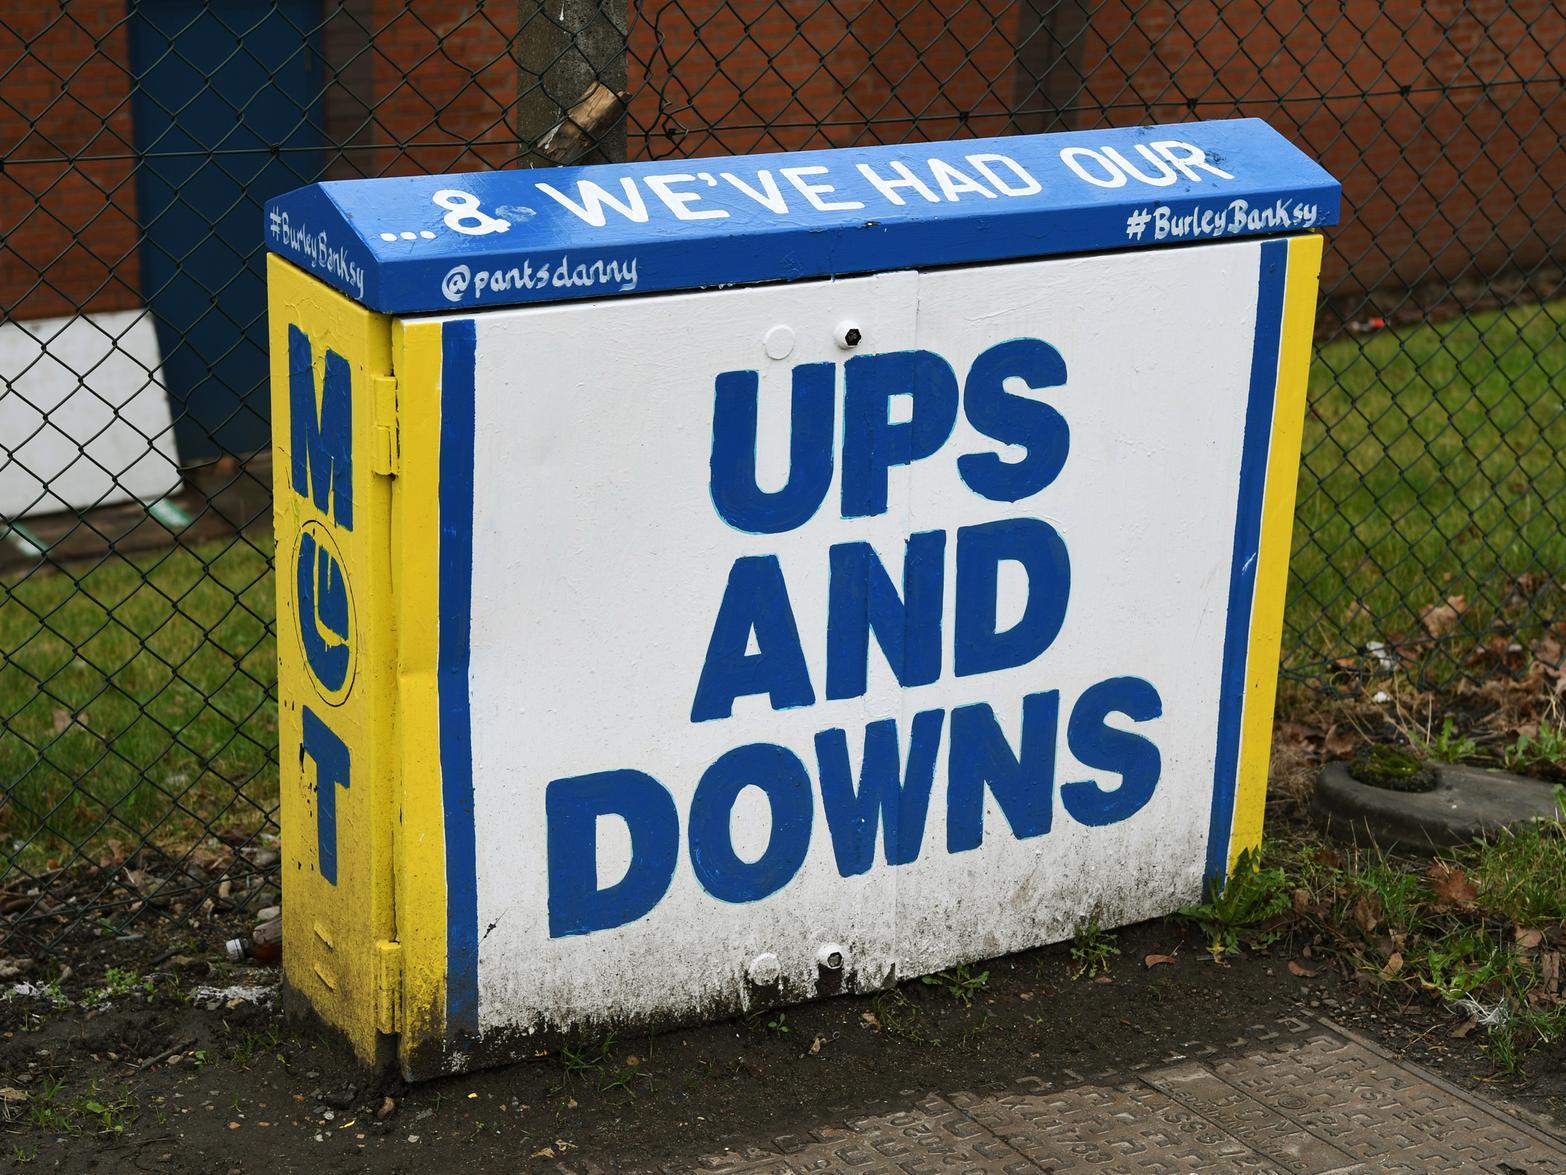 'UPS AND DOWNS' is near McDonalds on Elland Road.